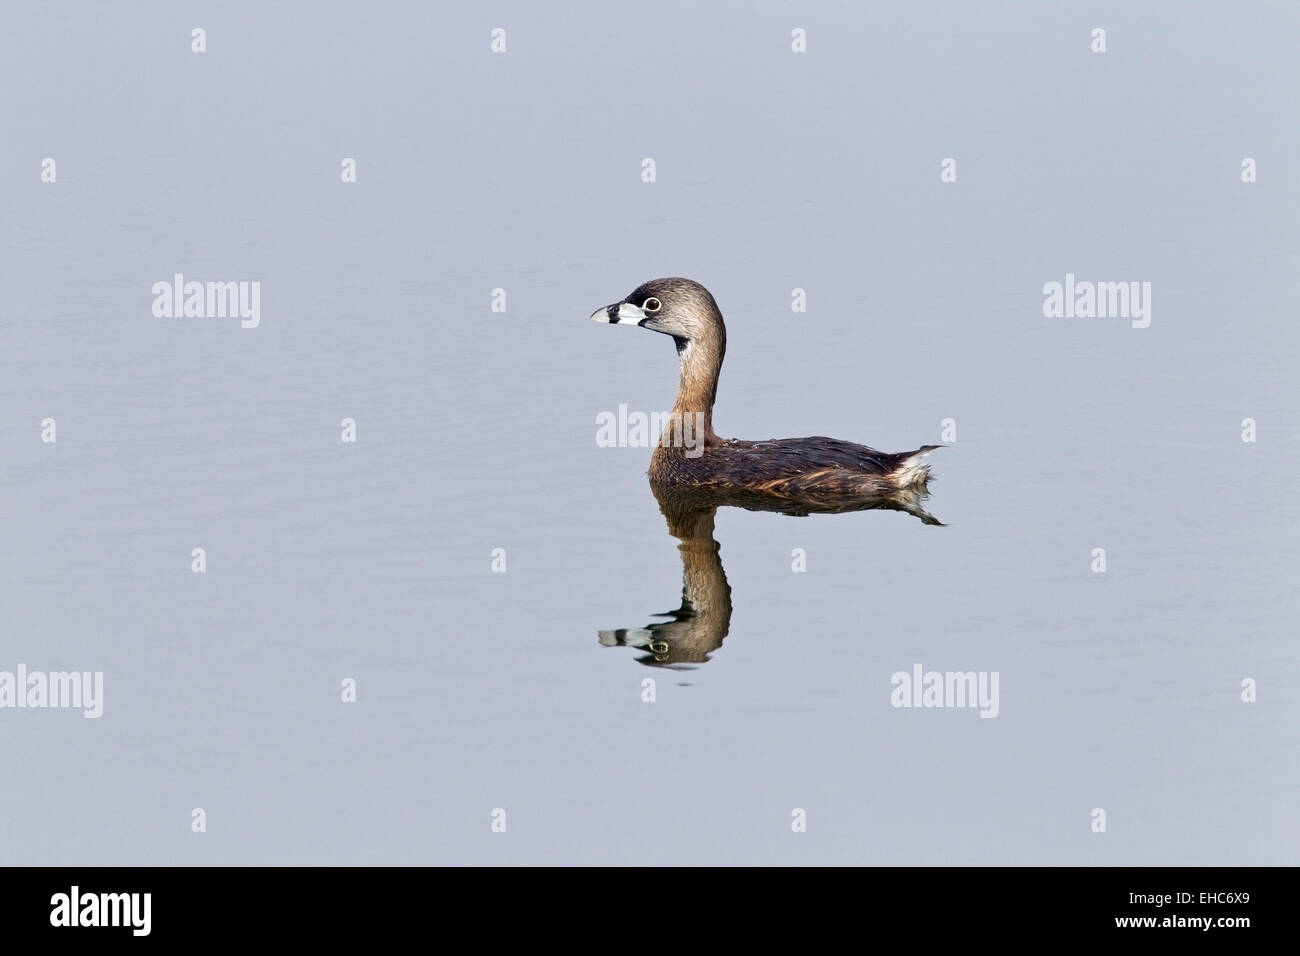 Pied-billed Grebe (Podilymbus podiceps), adult in summer plumage swimming on water with reflection, Florida, USA Stock Photo